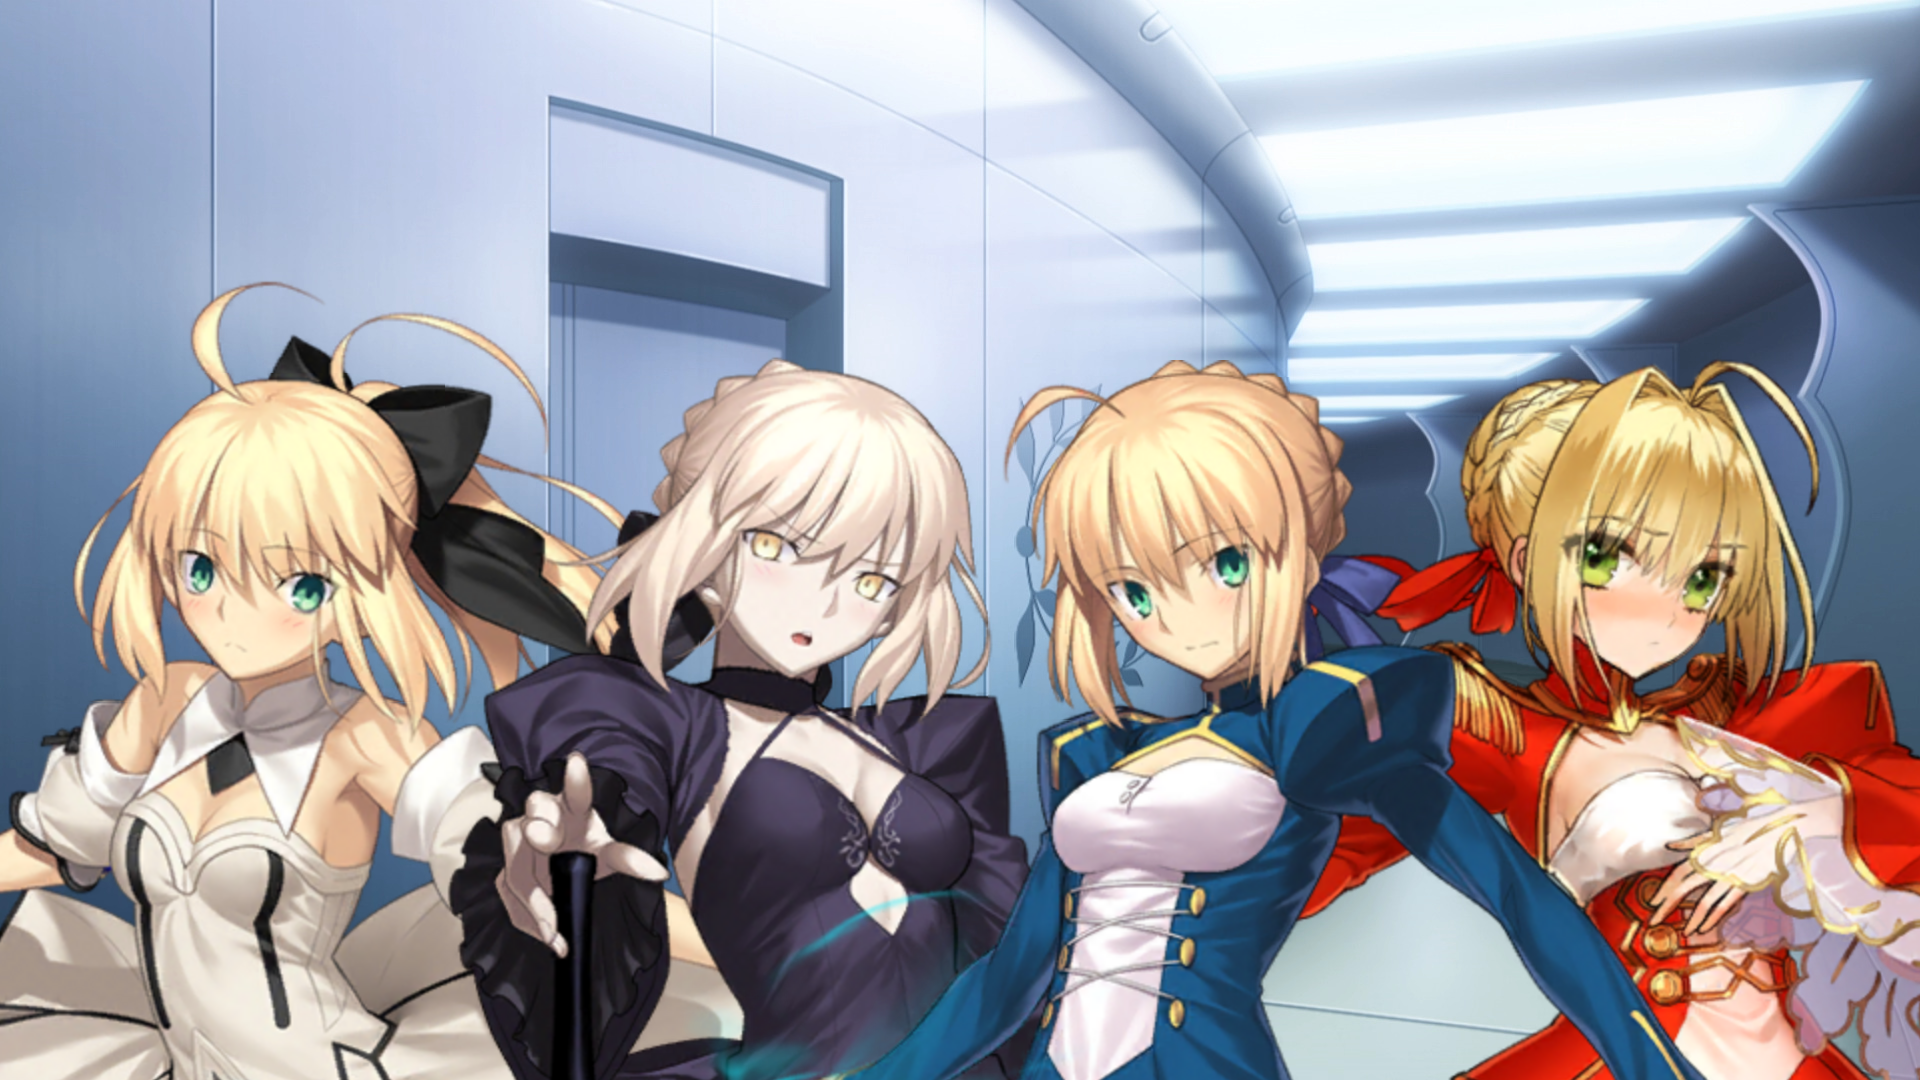 Anime 1920x1080 anime anime girls Fate series Fate/Stay Night fate/stay night: heaven's feel Fate/Unlimited Codes  Fate/Extra Fate/Extra CCC Fate/Grand Order Artoria Pendragon Saber Saber Alter Saber Lily Nero Claudius blonde ahoge boobs artwork digital art fan art edit